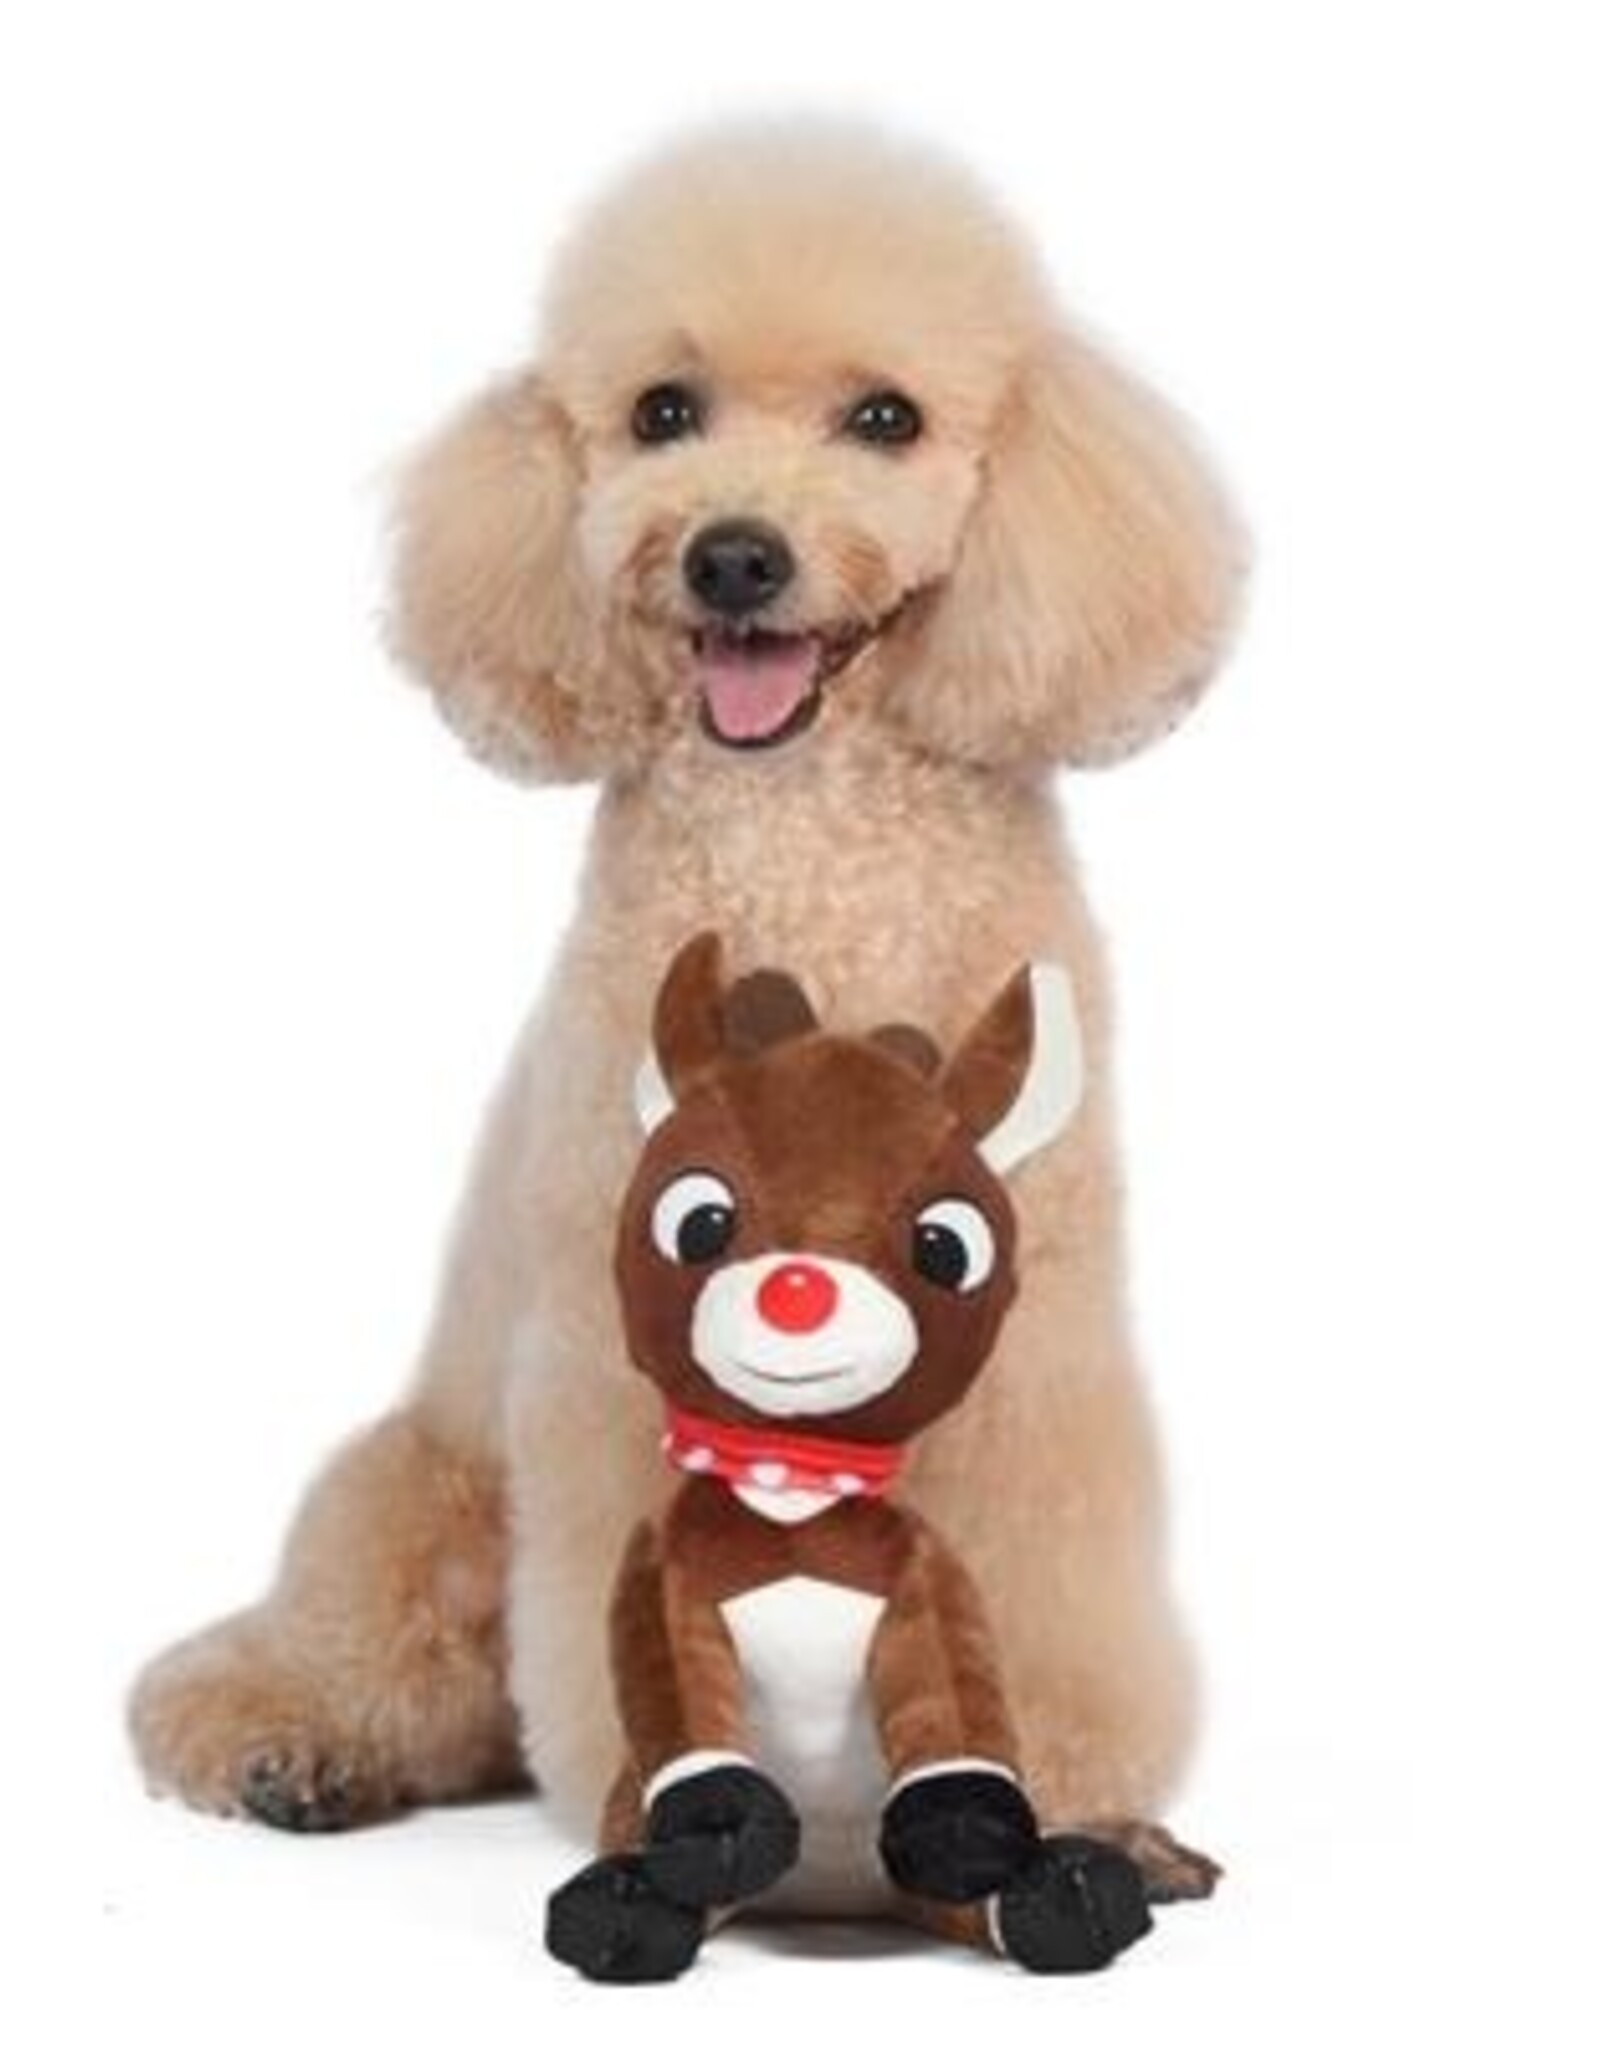 Rudolph: 9" Holiday Rudolph Plush Squeaker Toy